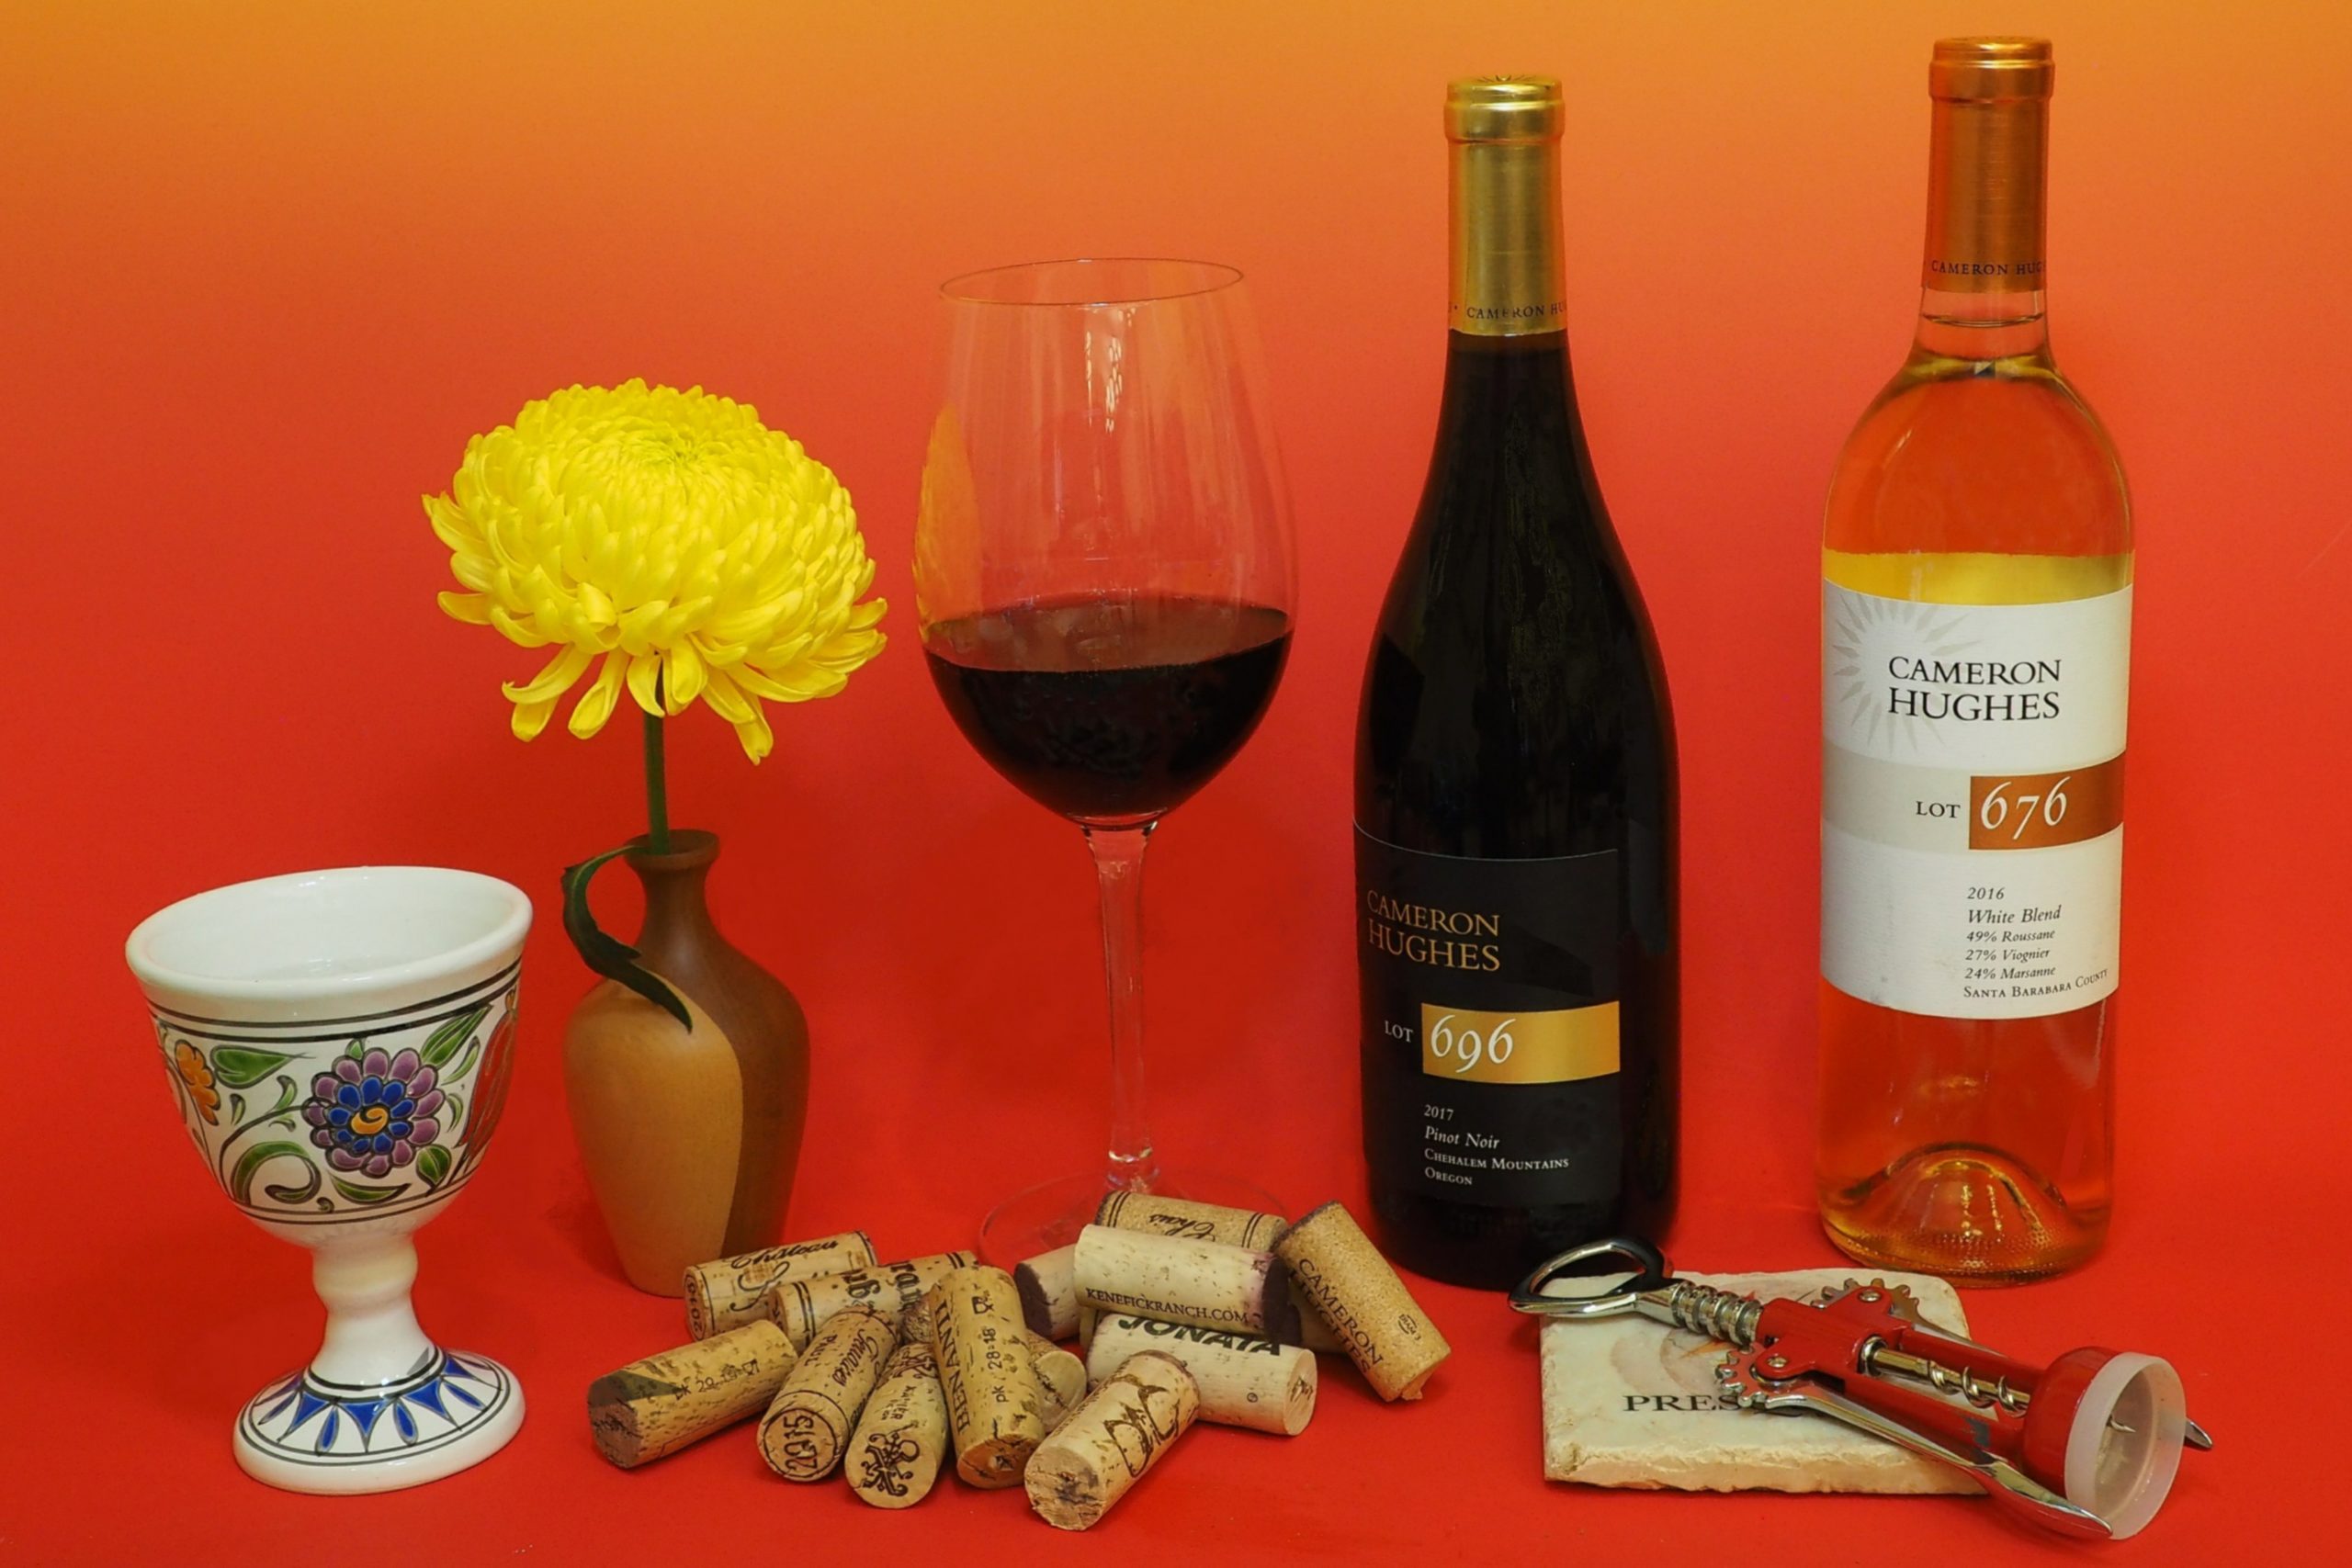 Cameron Hughes Lot 696 and 676 wine bottles with corks, a fresh flower and various wine accessories